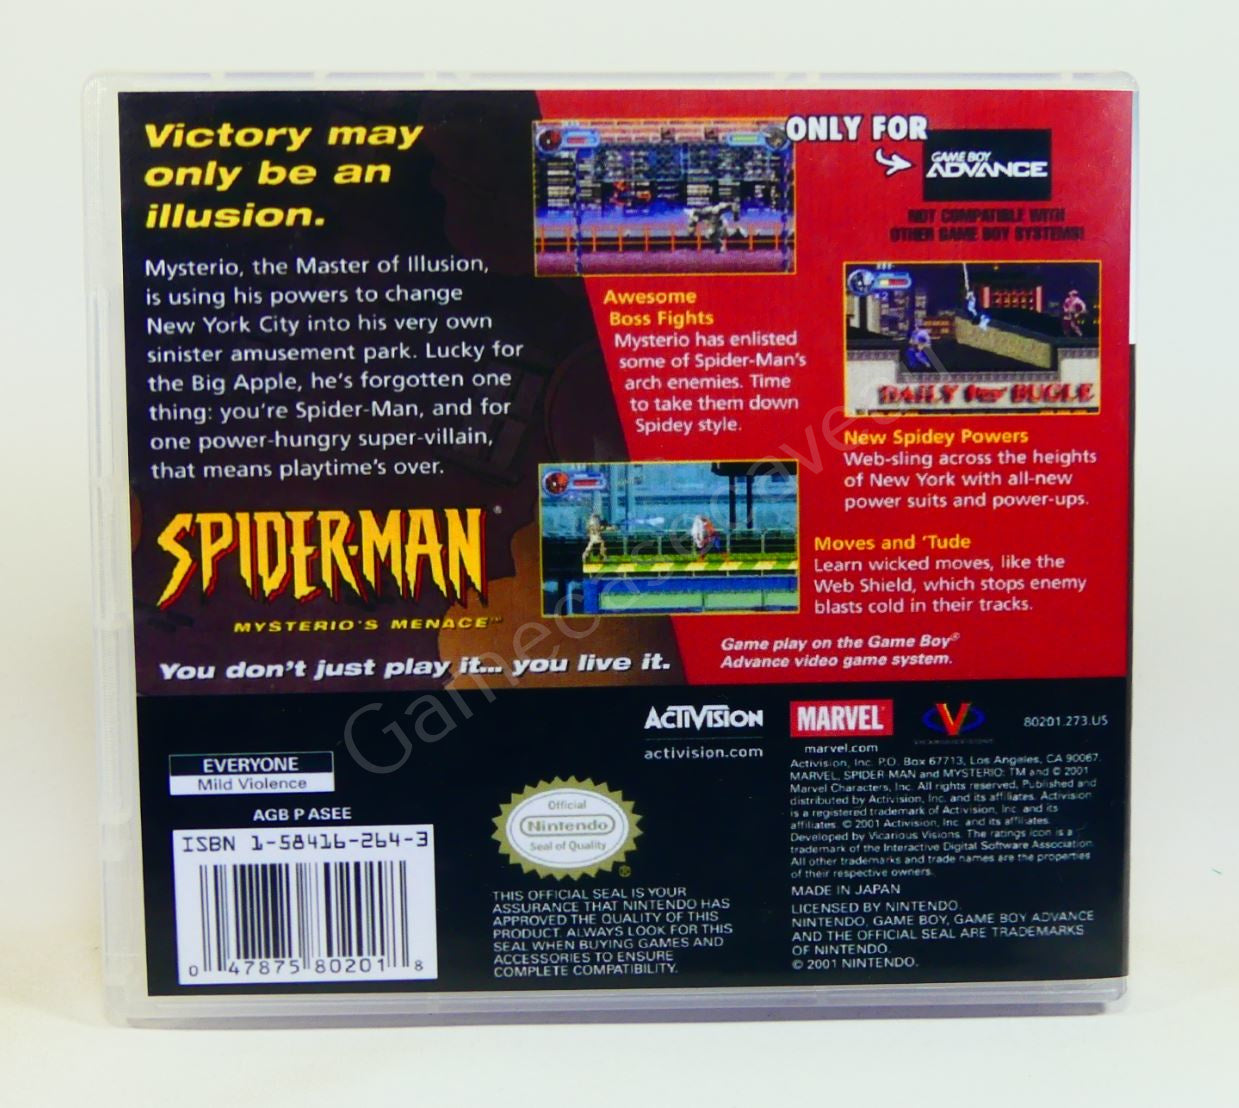 Spider-Man Mysterio's Menace - GBA Replacement Case